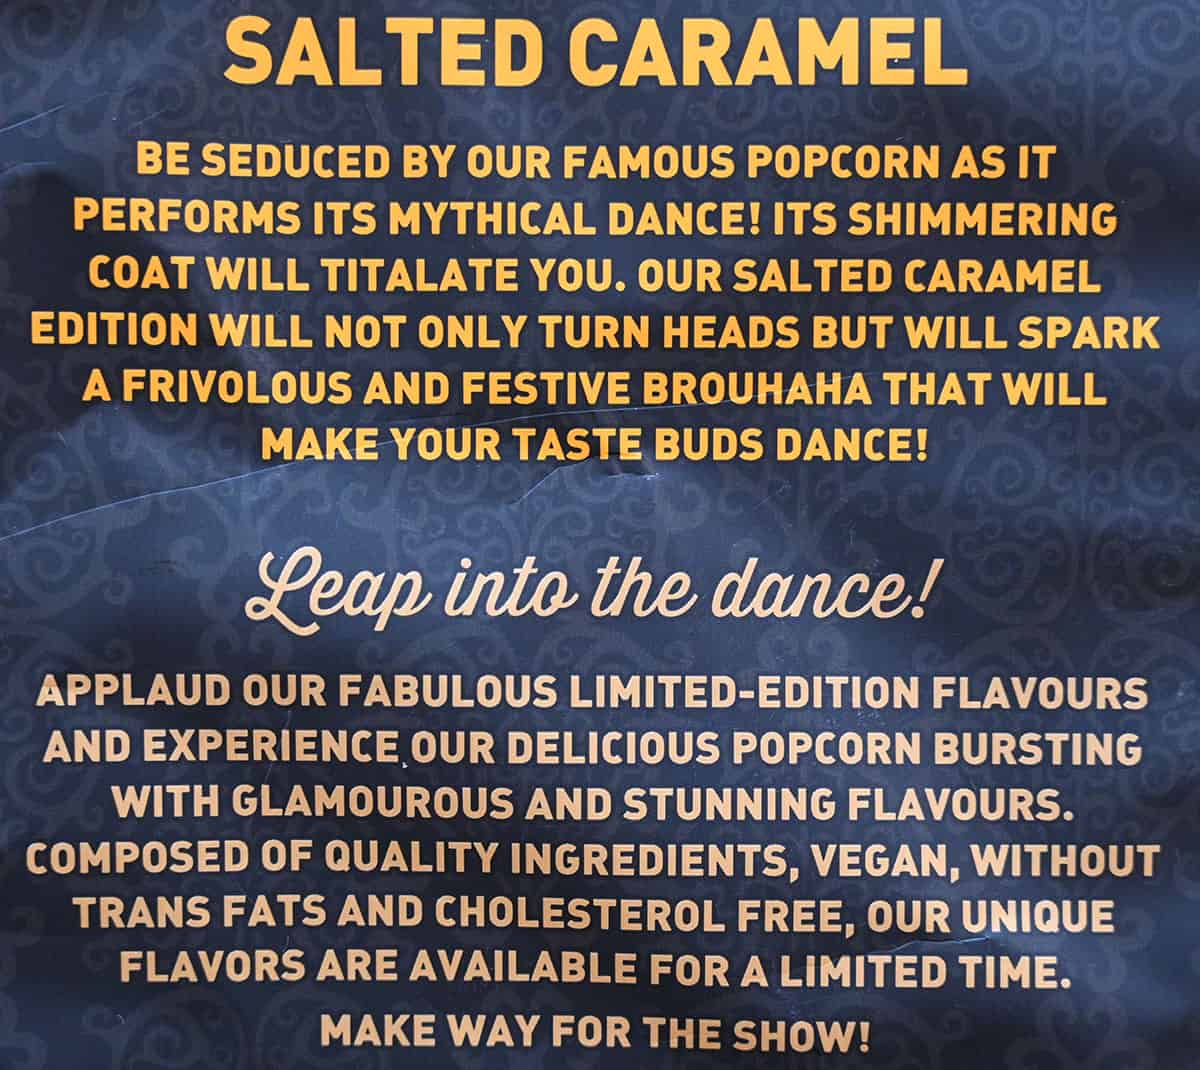 Product description for the salted caramel French Cancan Popcorn from bag.